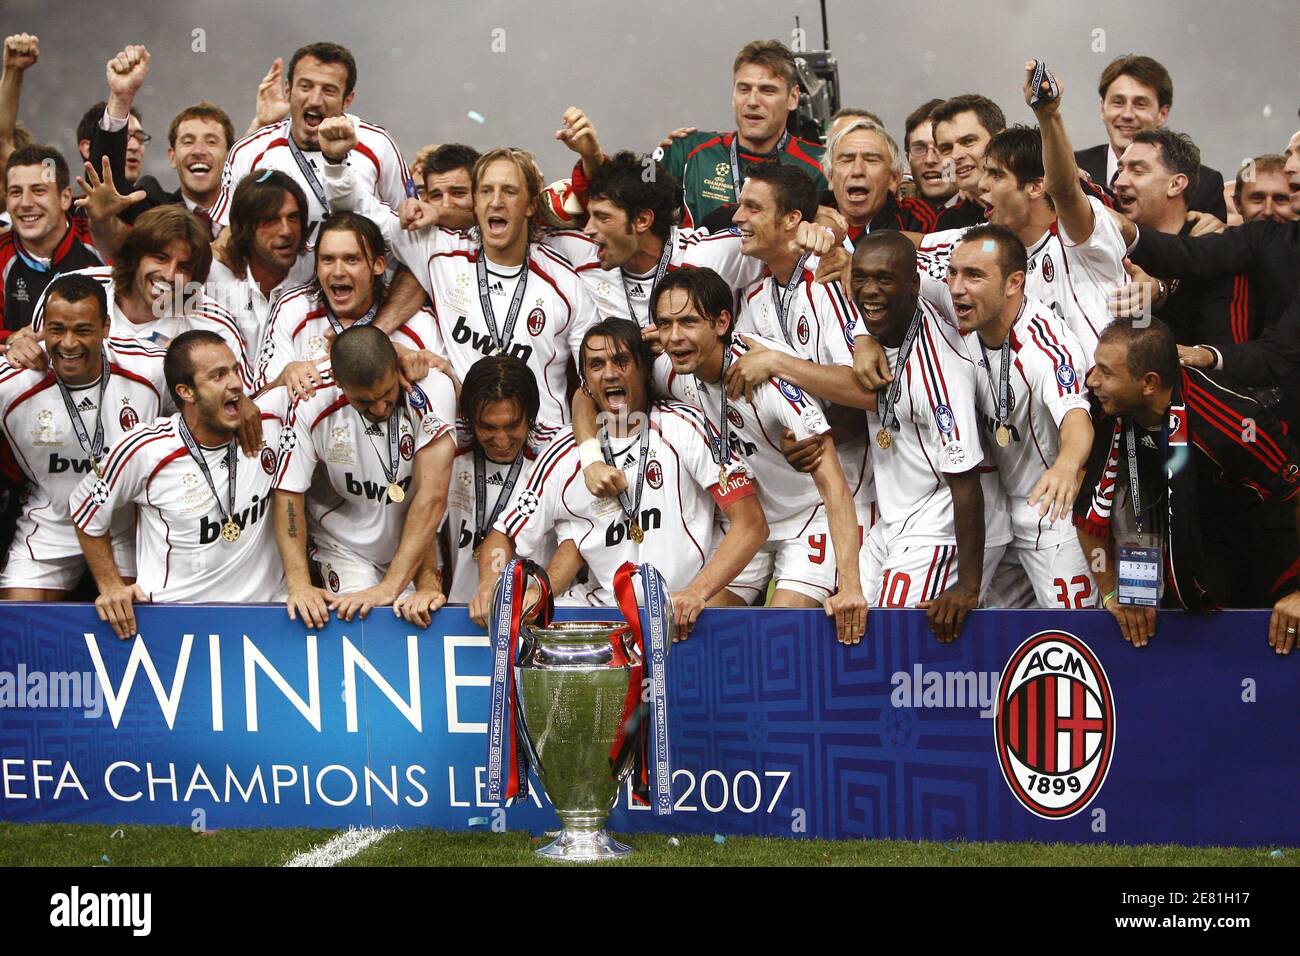 AC Milan's players celebate during the UEFA Champions League Final, AC  Milan v Liverpool at Olympic Stadium, in Athens, Greece, on May 23, 2007.  AC Milan won 2-1. Photo by Christian Liewig/ABACAPRESS.COM